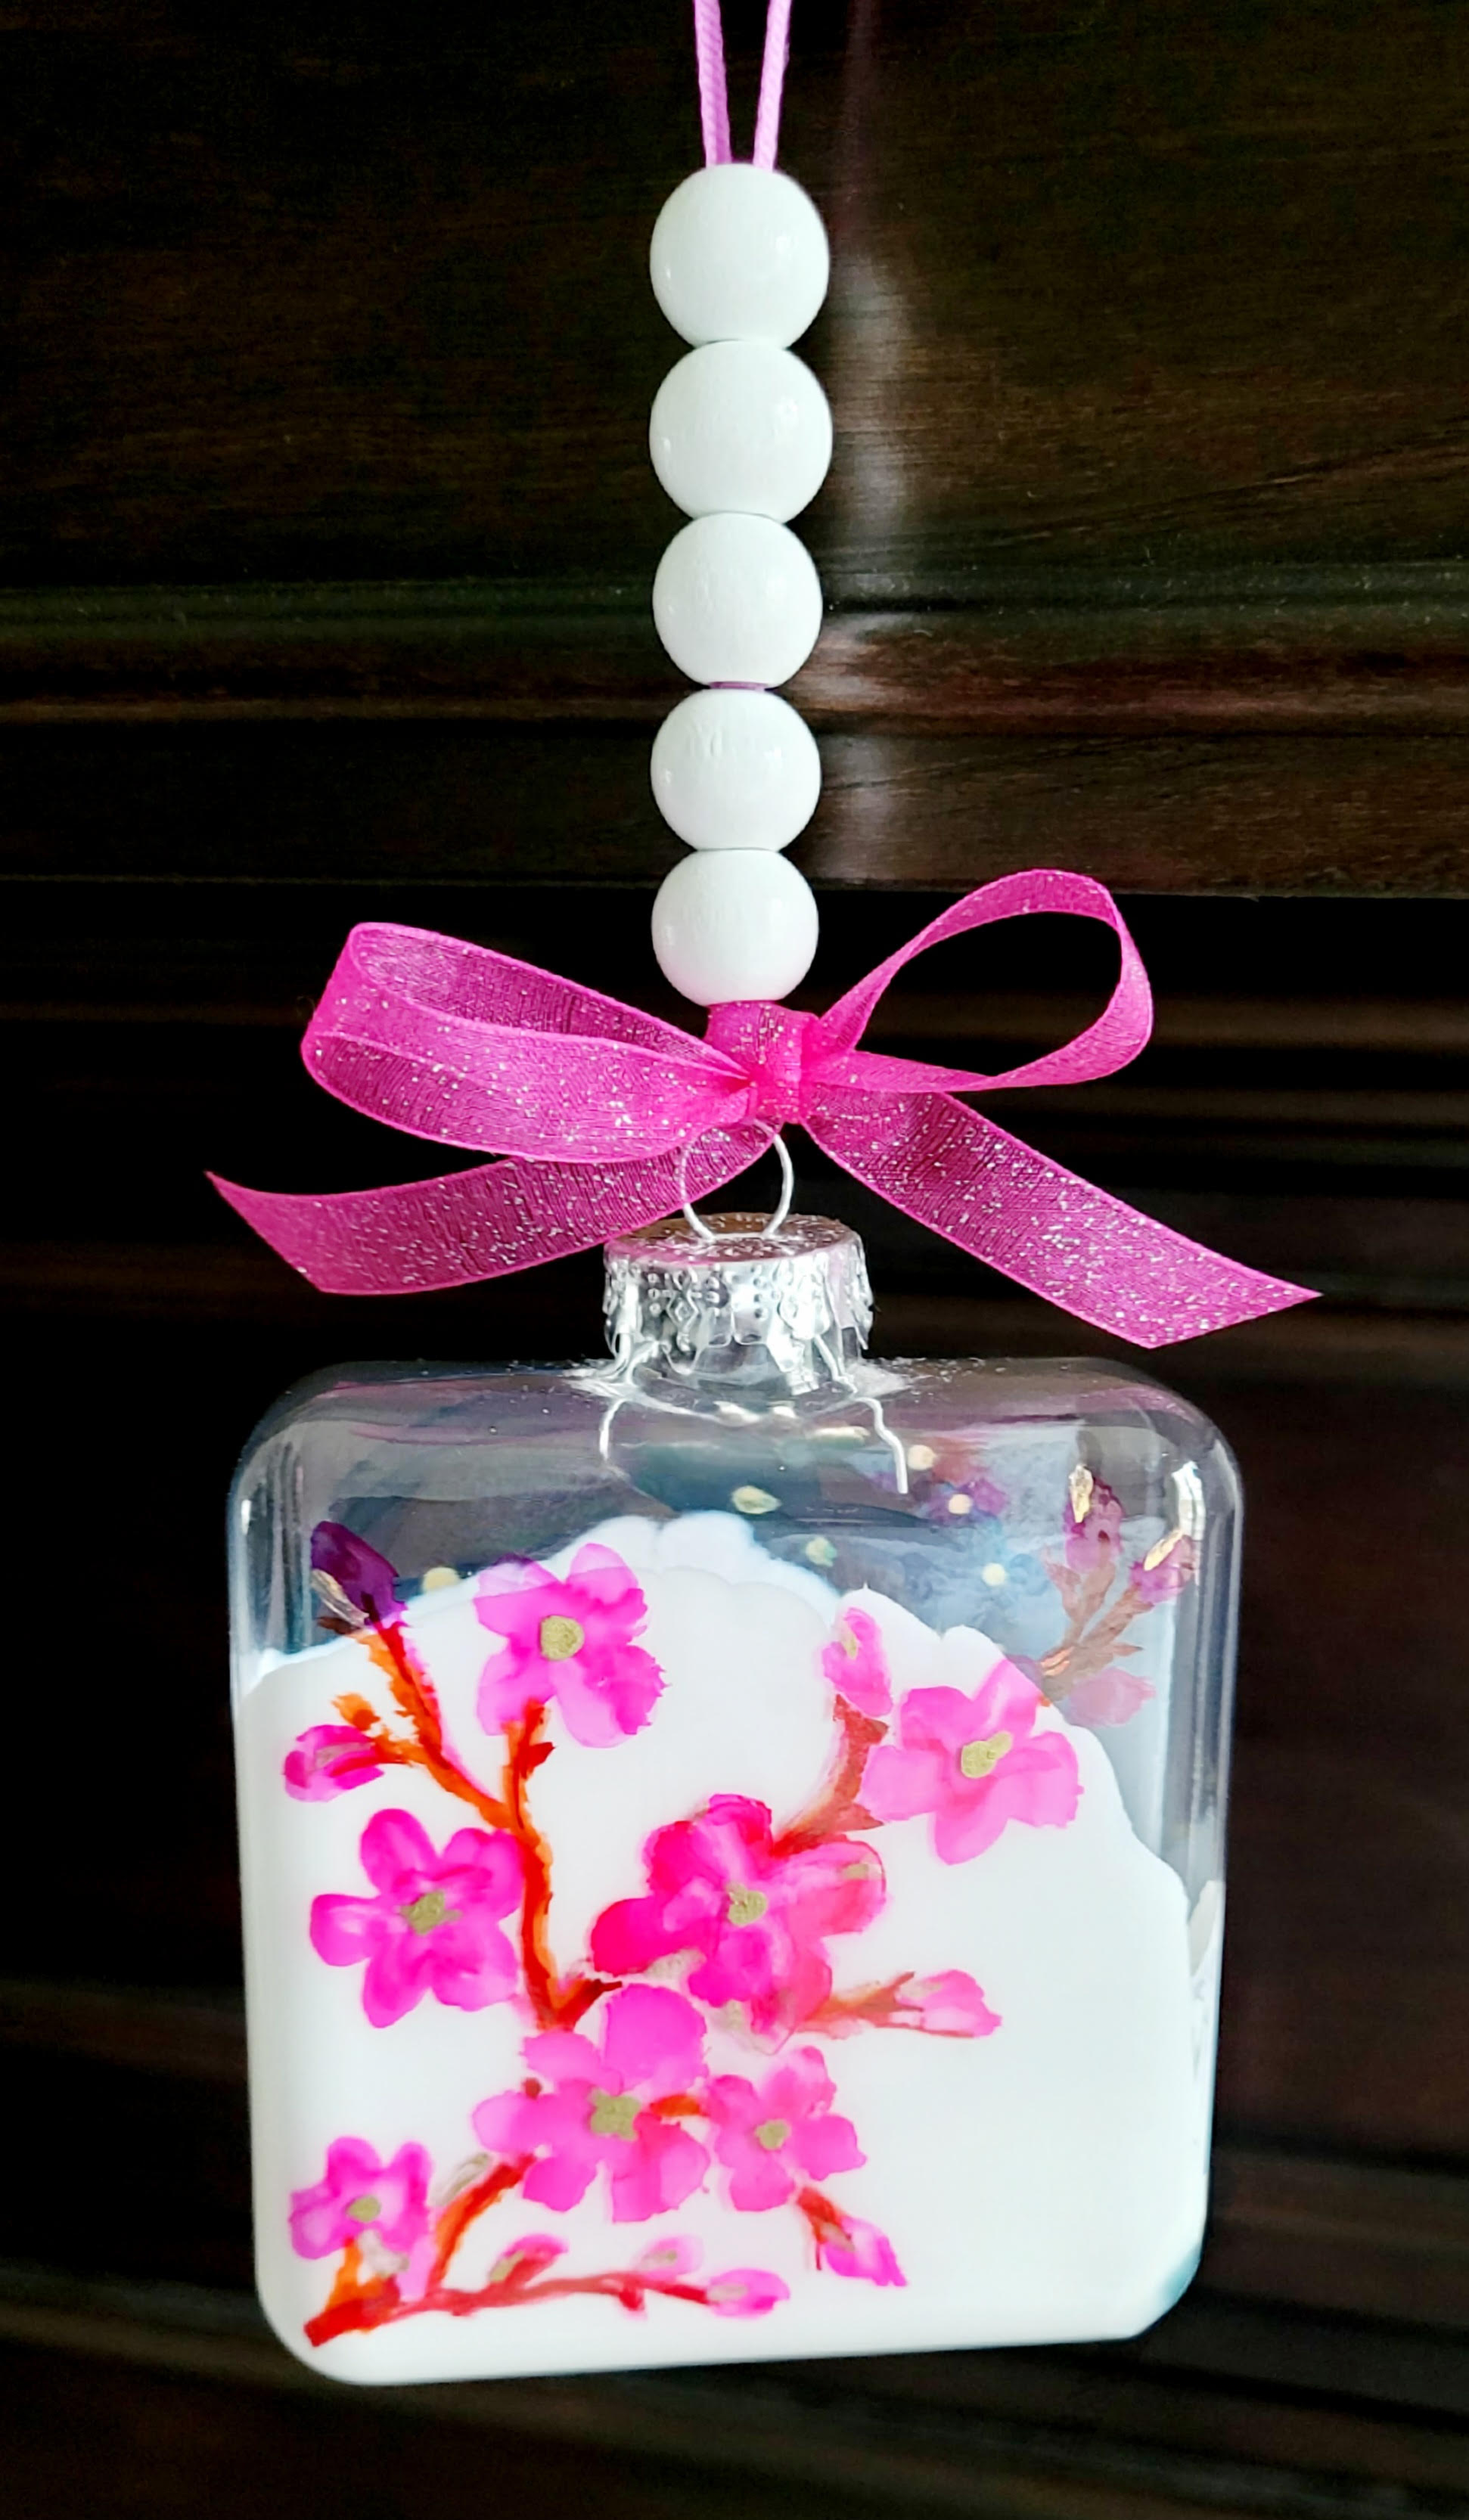 A color photo of a decorative ornament featuring a beaded hanger and pink bow.